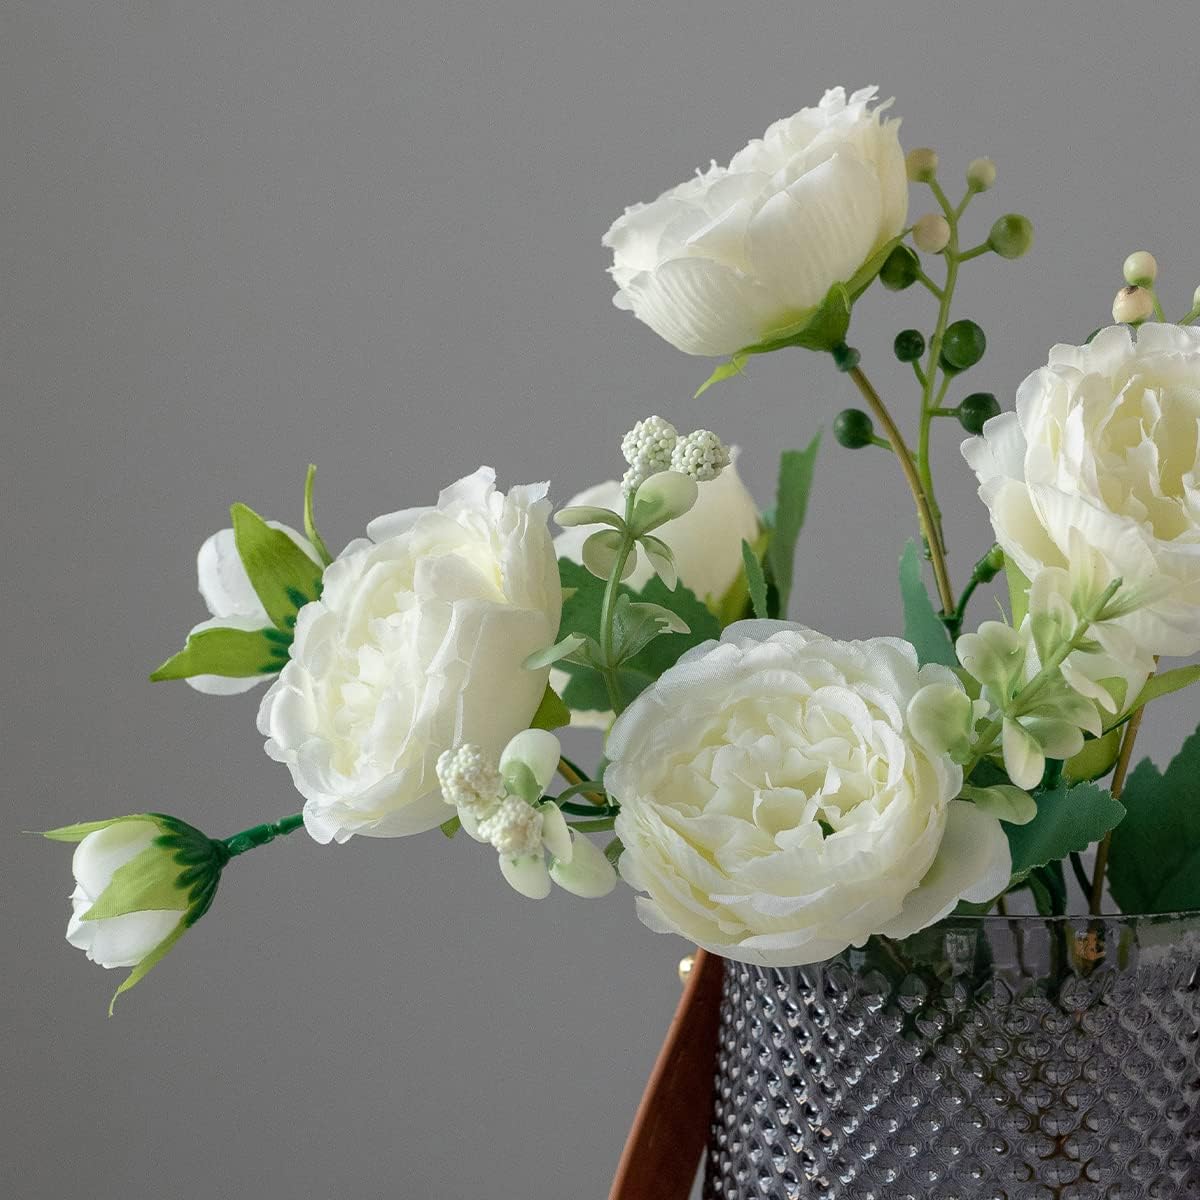 Hobyhoon-Artificial Flowers-White-for Decoration-6012